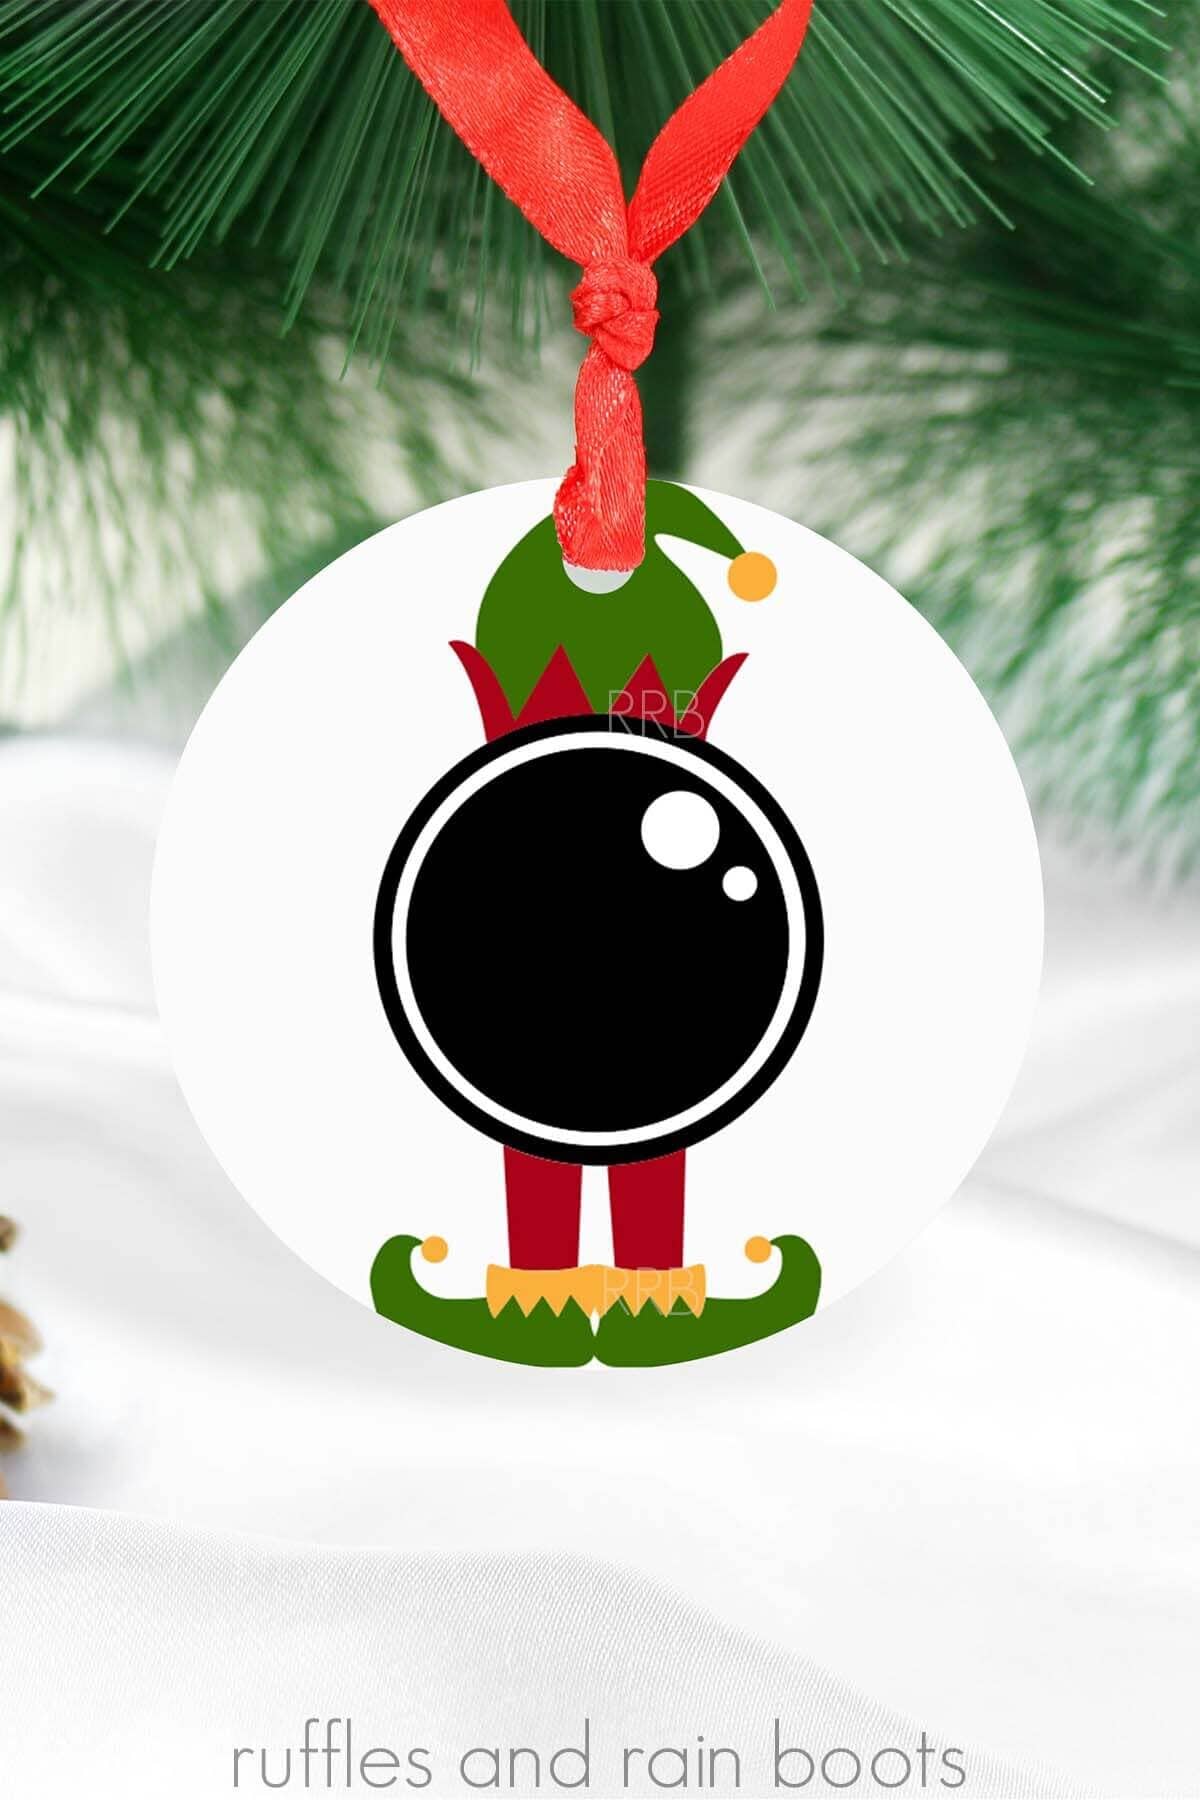 Elf cam SVG in black, red, green, and yellow vinyl on white ornament on holiday background.